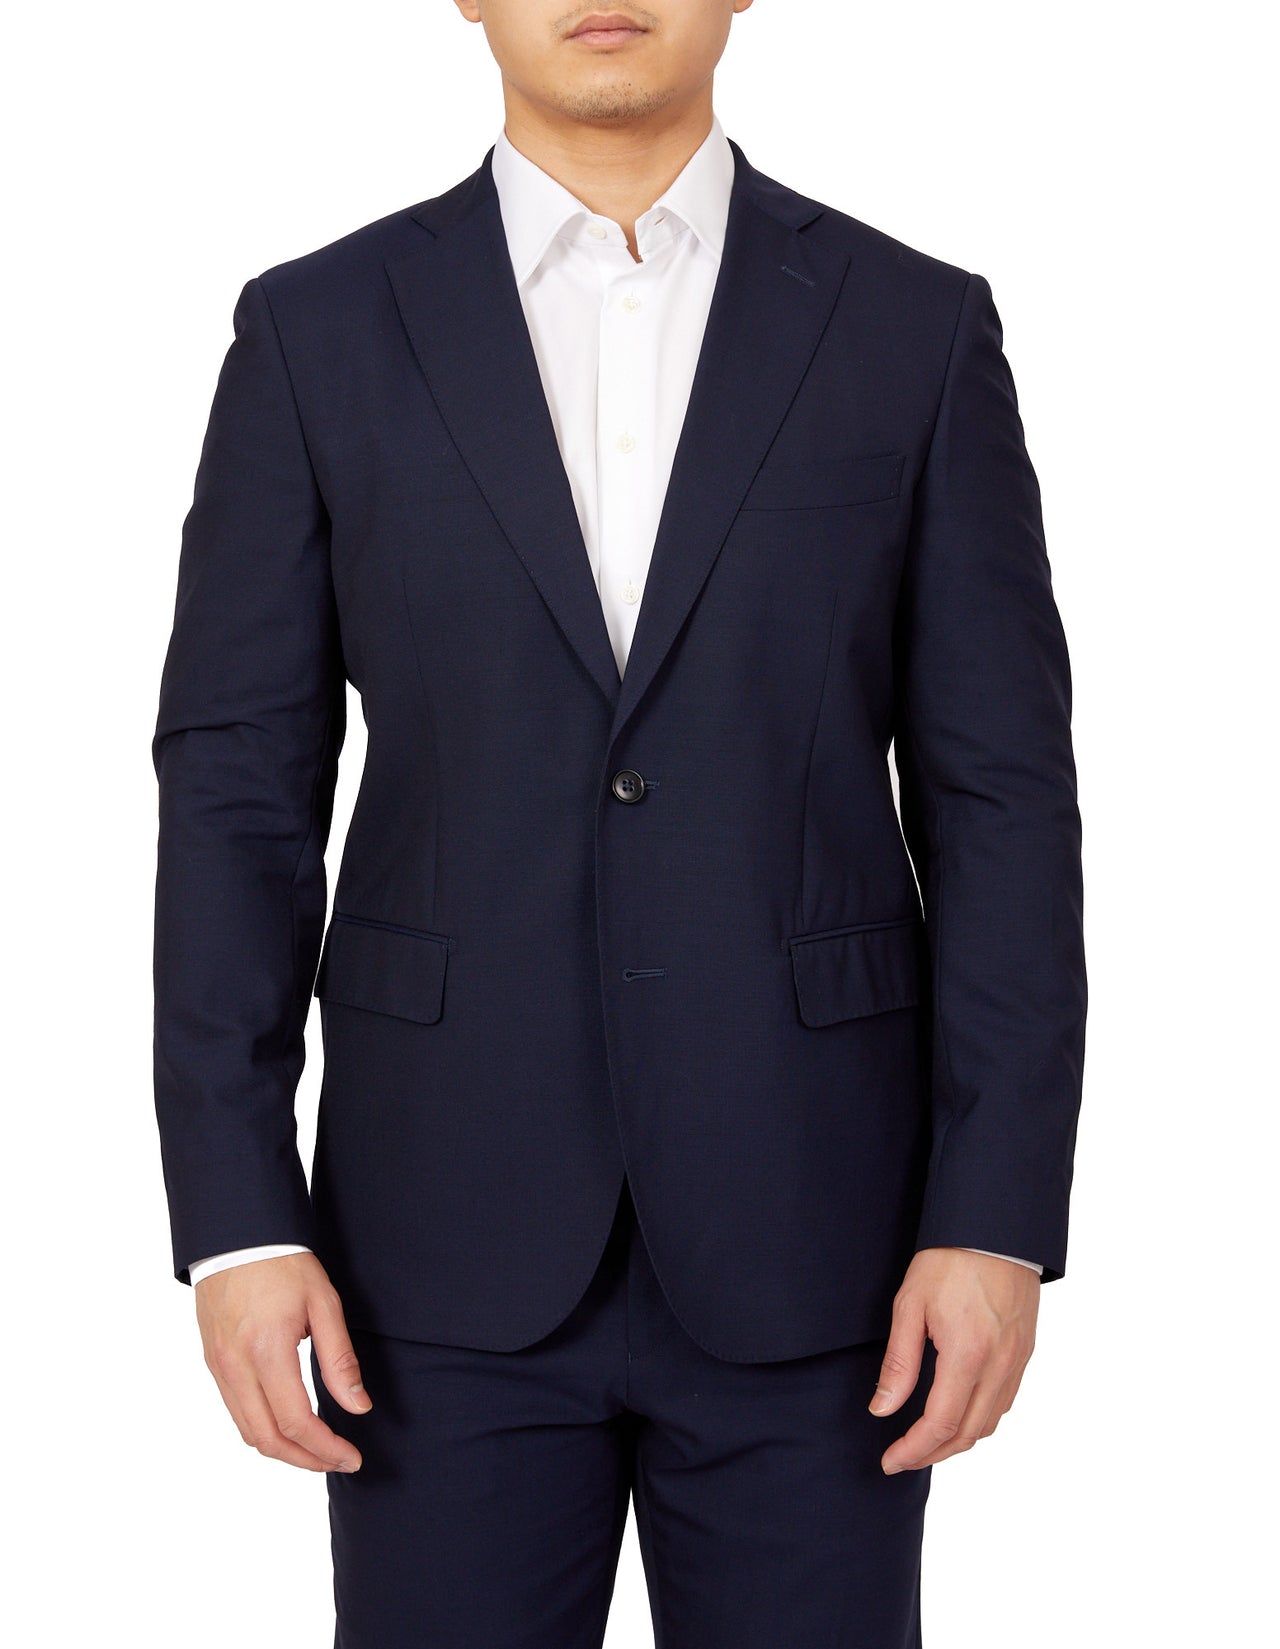 HENRY SARTORIAL Twill Suit BLUE LG